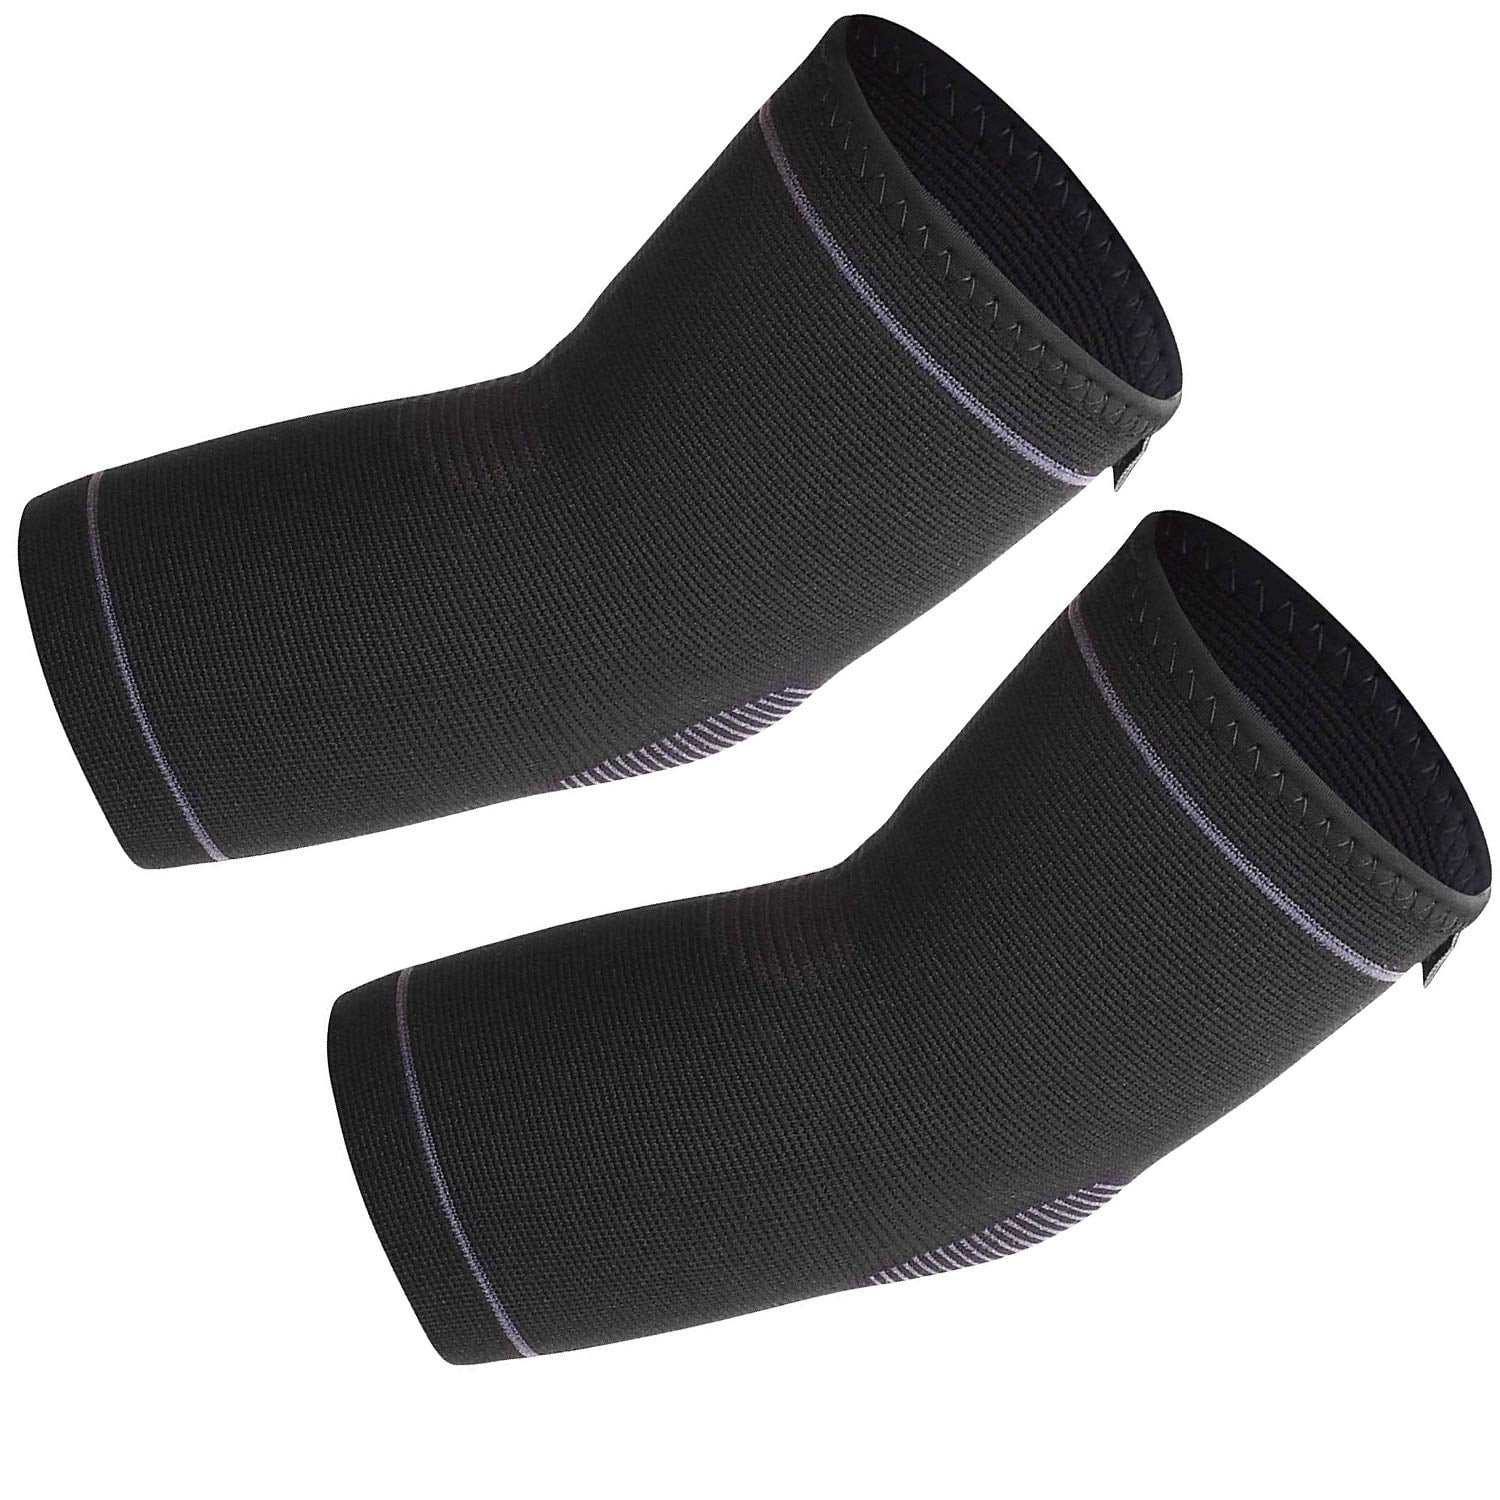 Details about   1pcs Breathable Elastic Rubber Black High Arch Orthopedic Bandage Relief Pain 